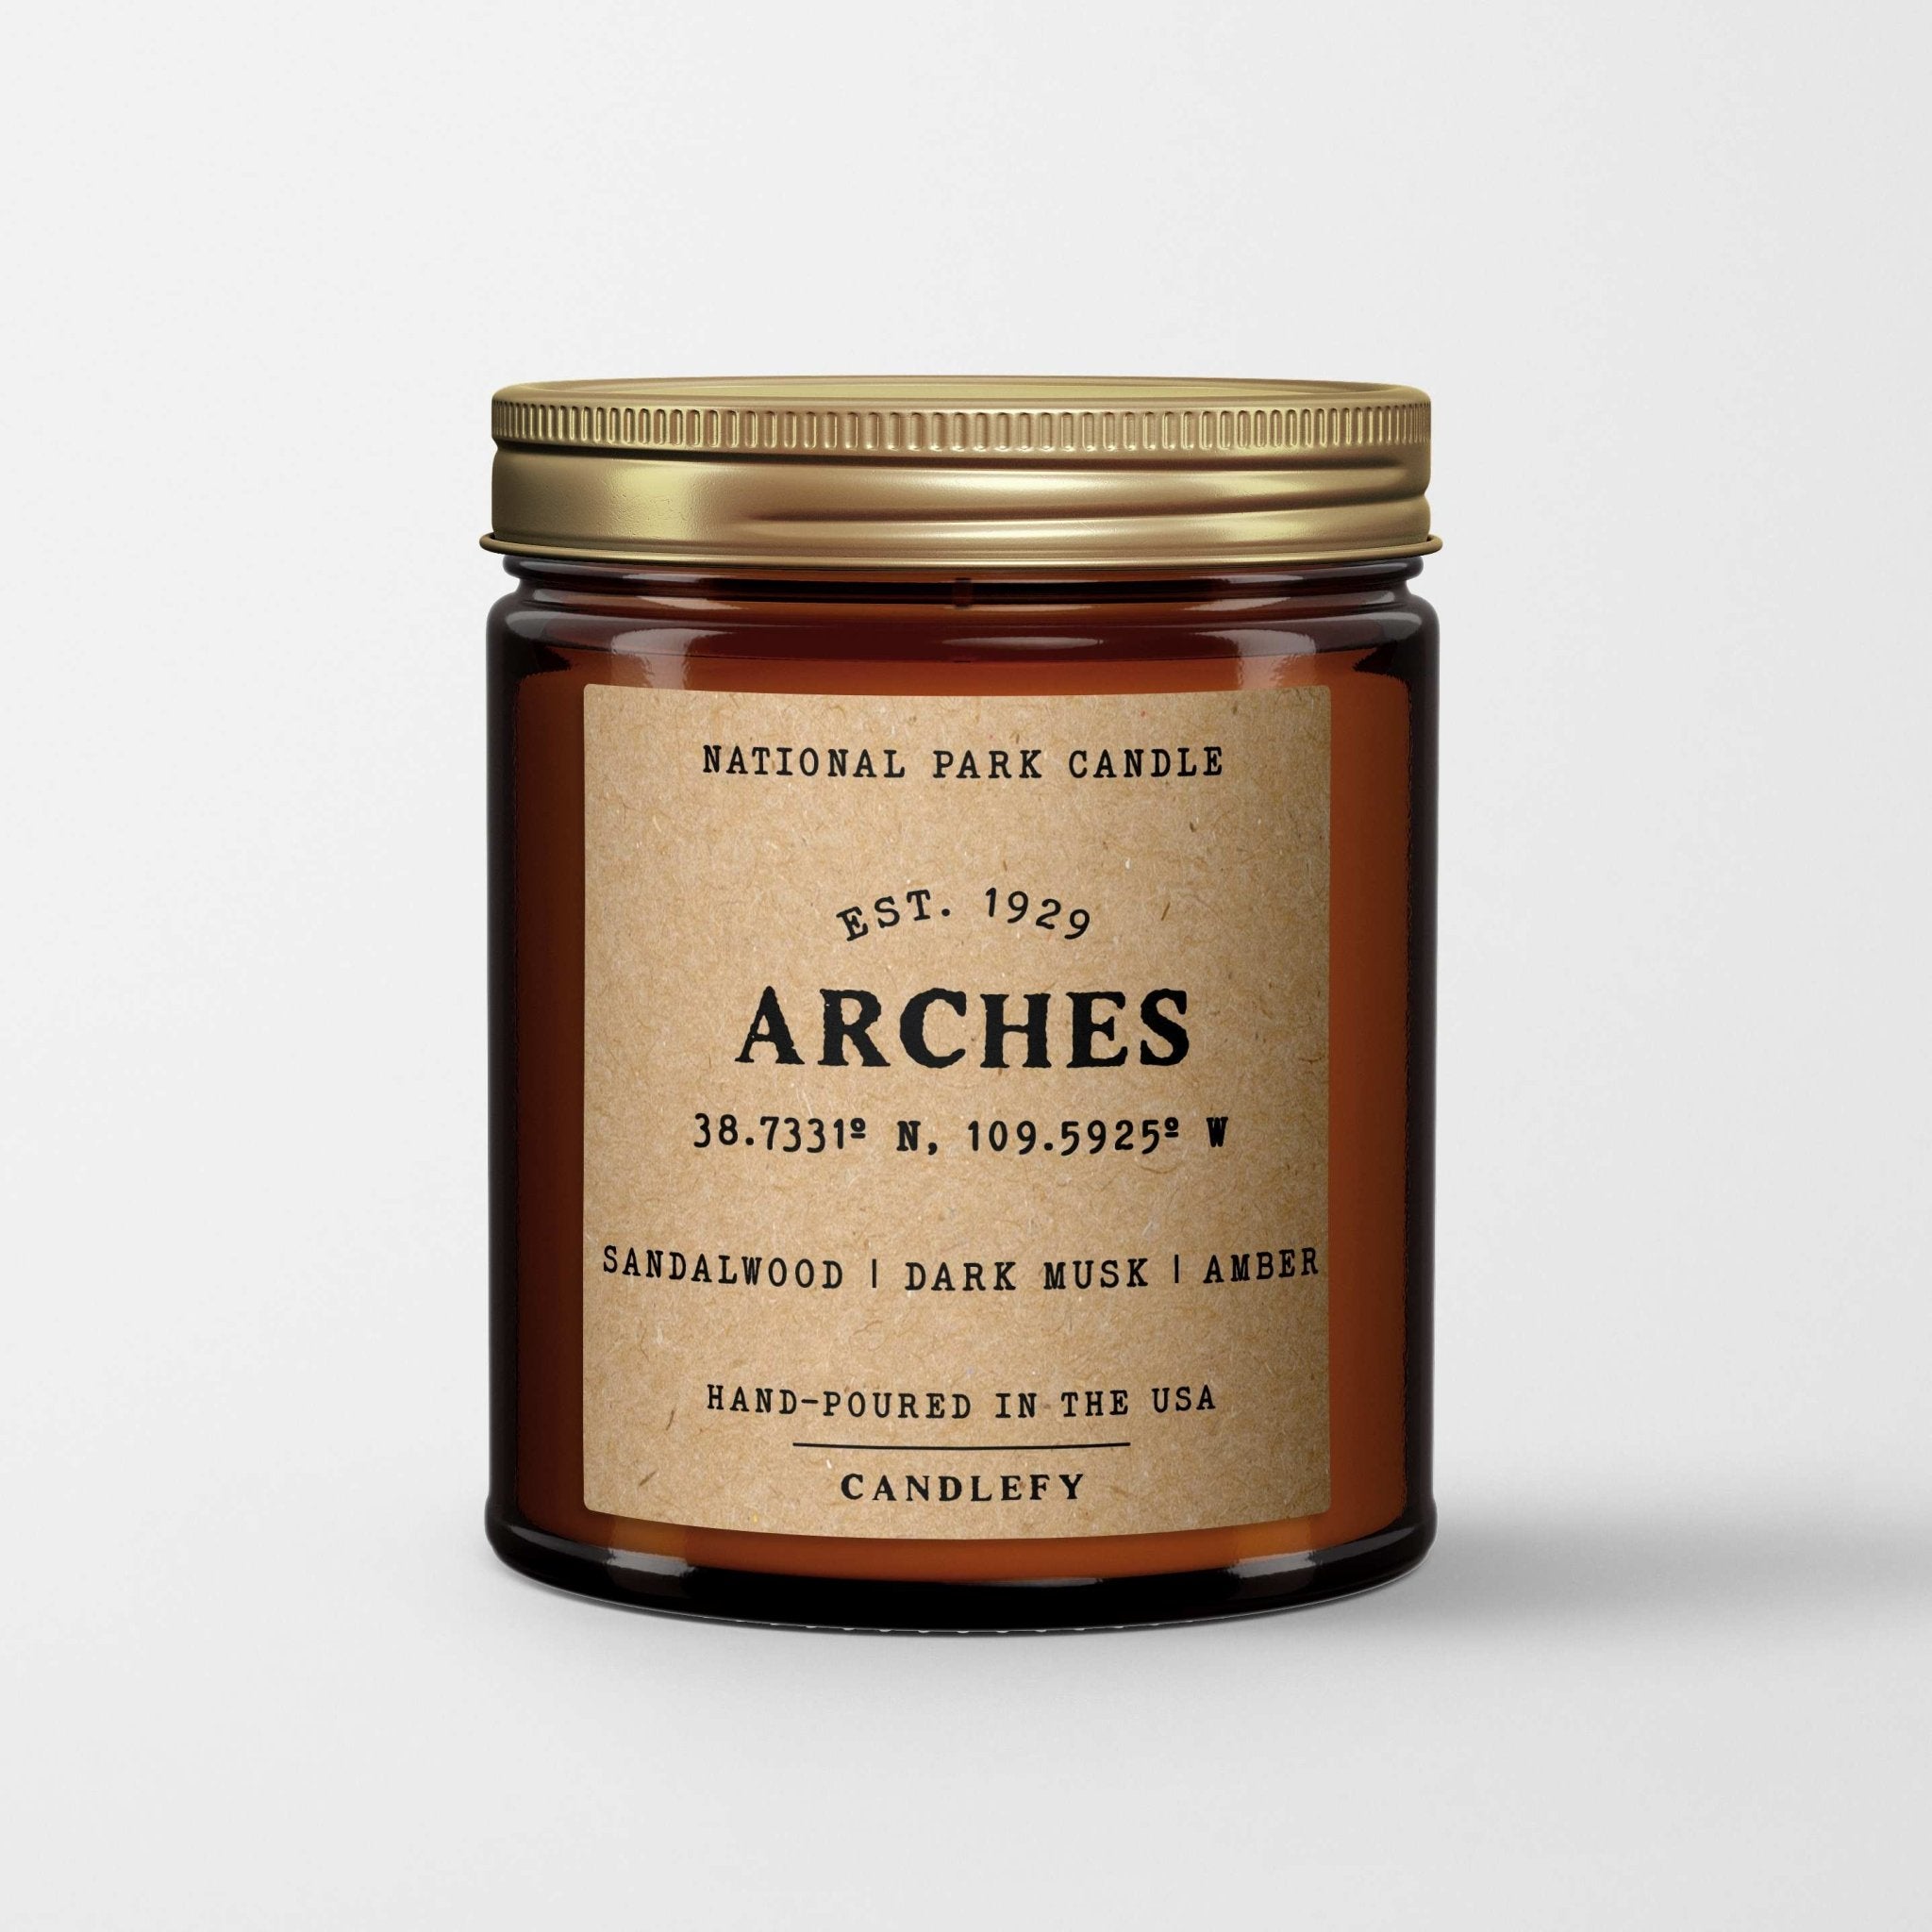 Arches National Park Candle - Candlefy